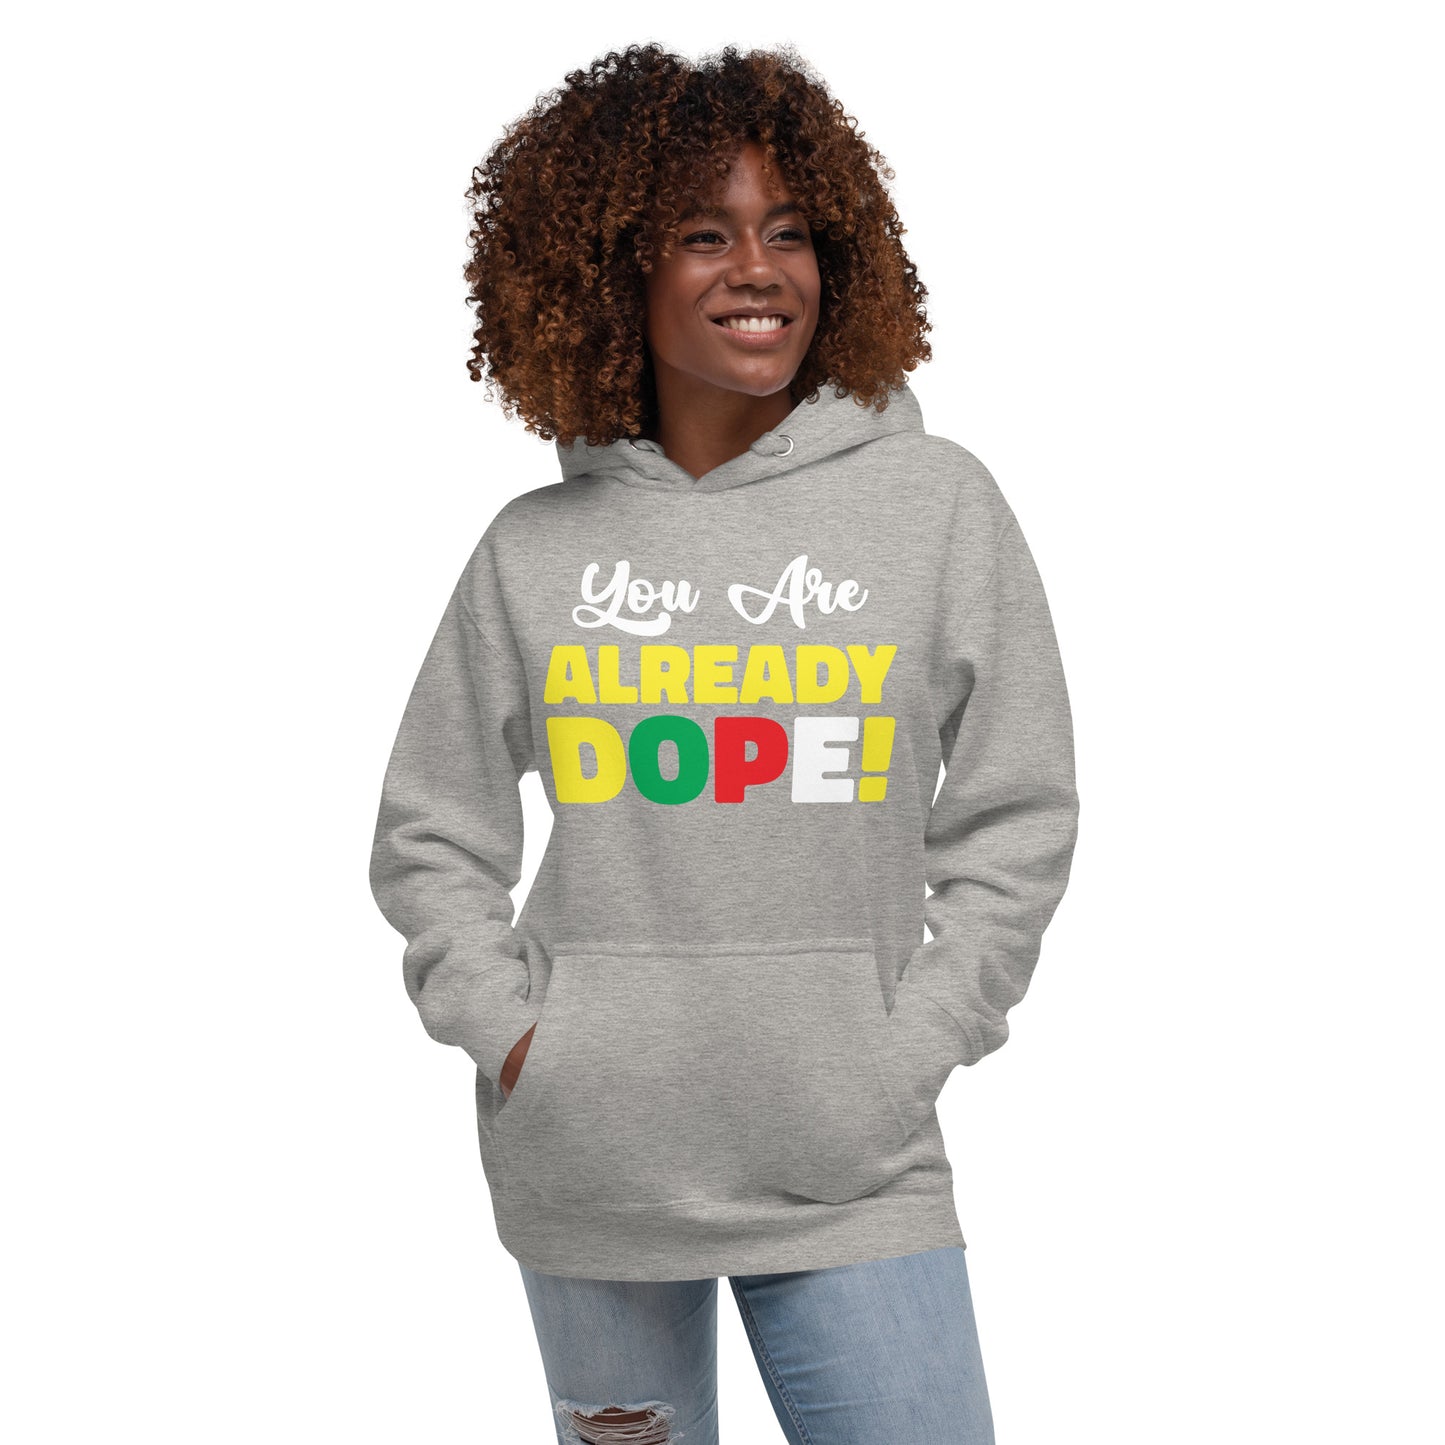 You Are Already Dope! Hoodie